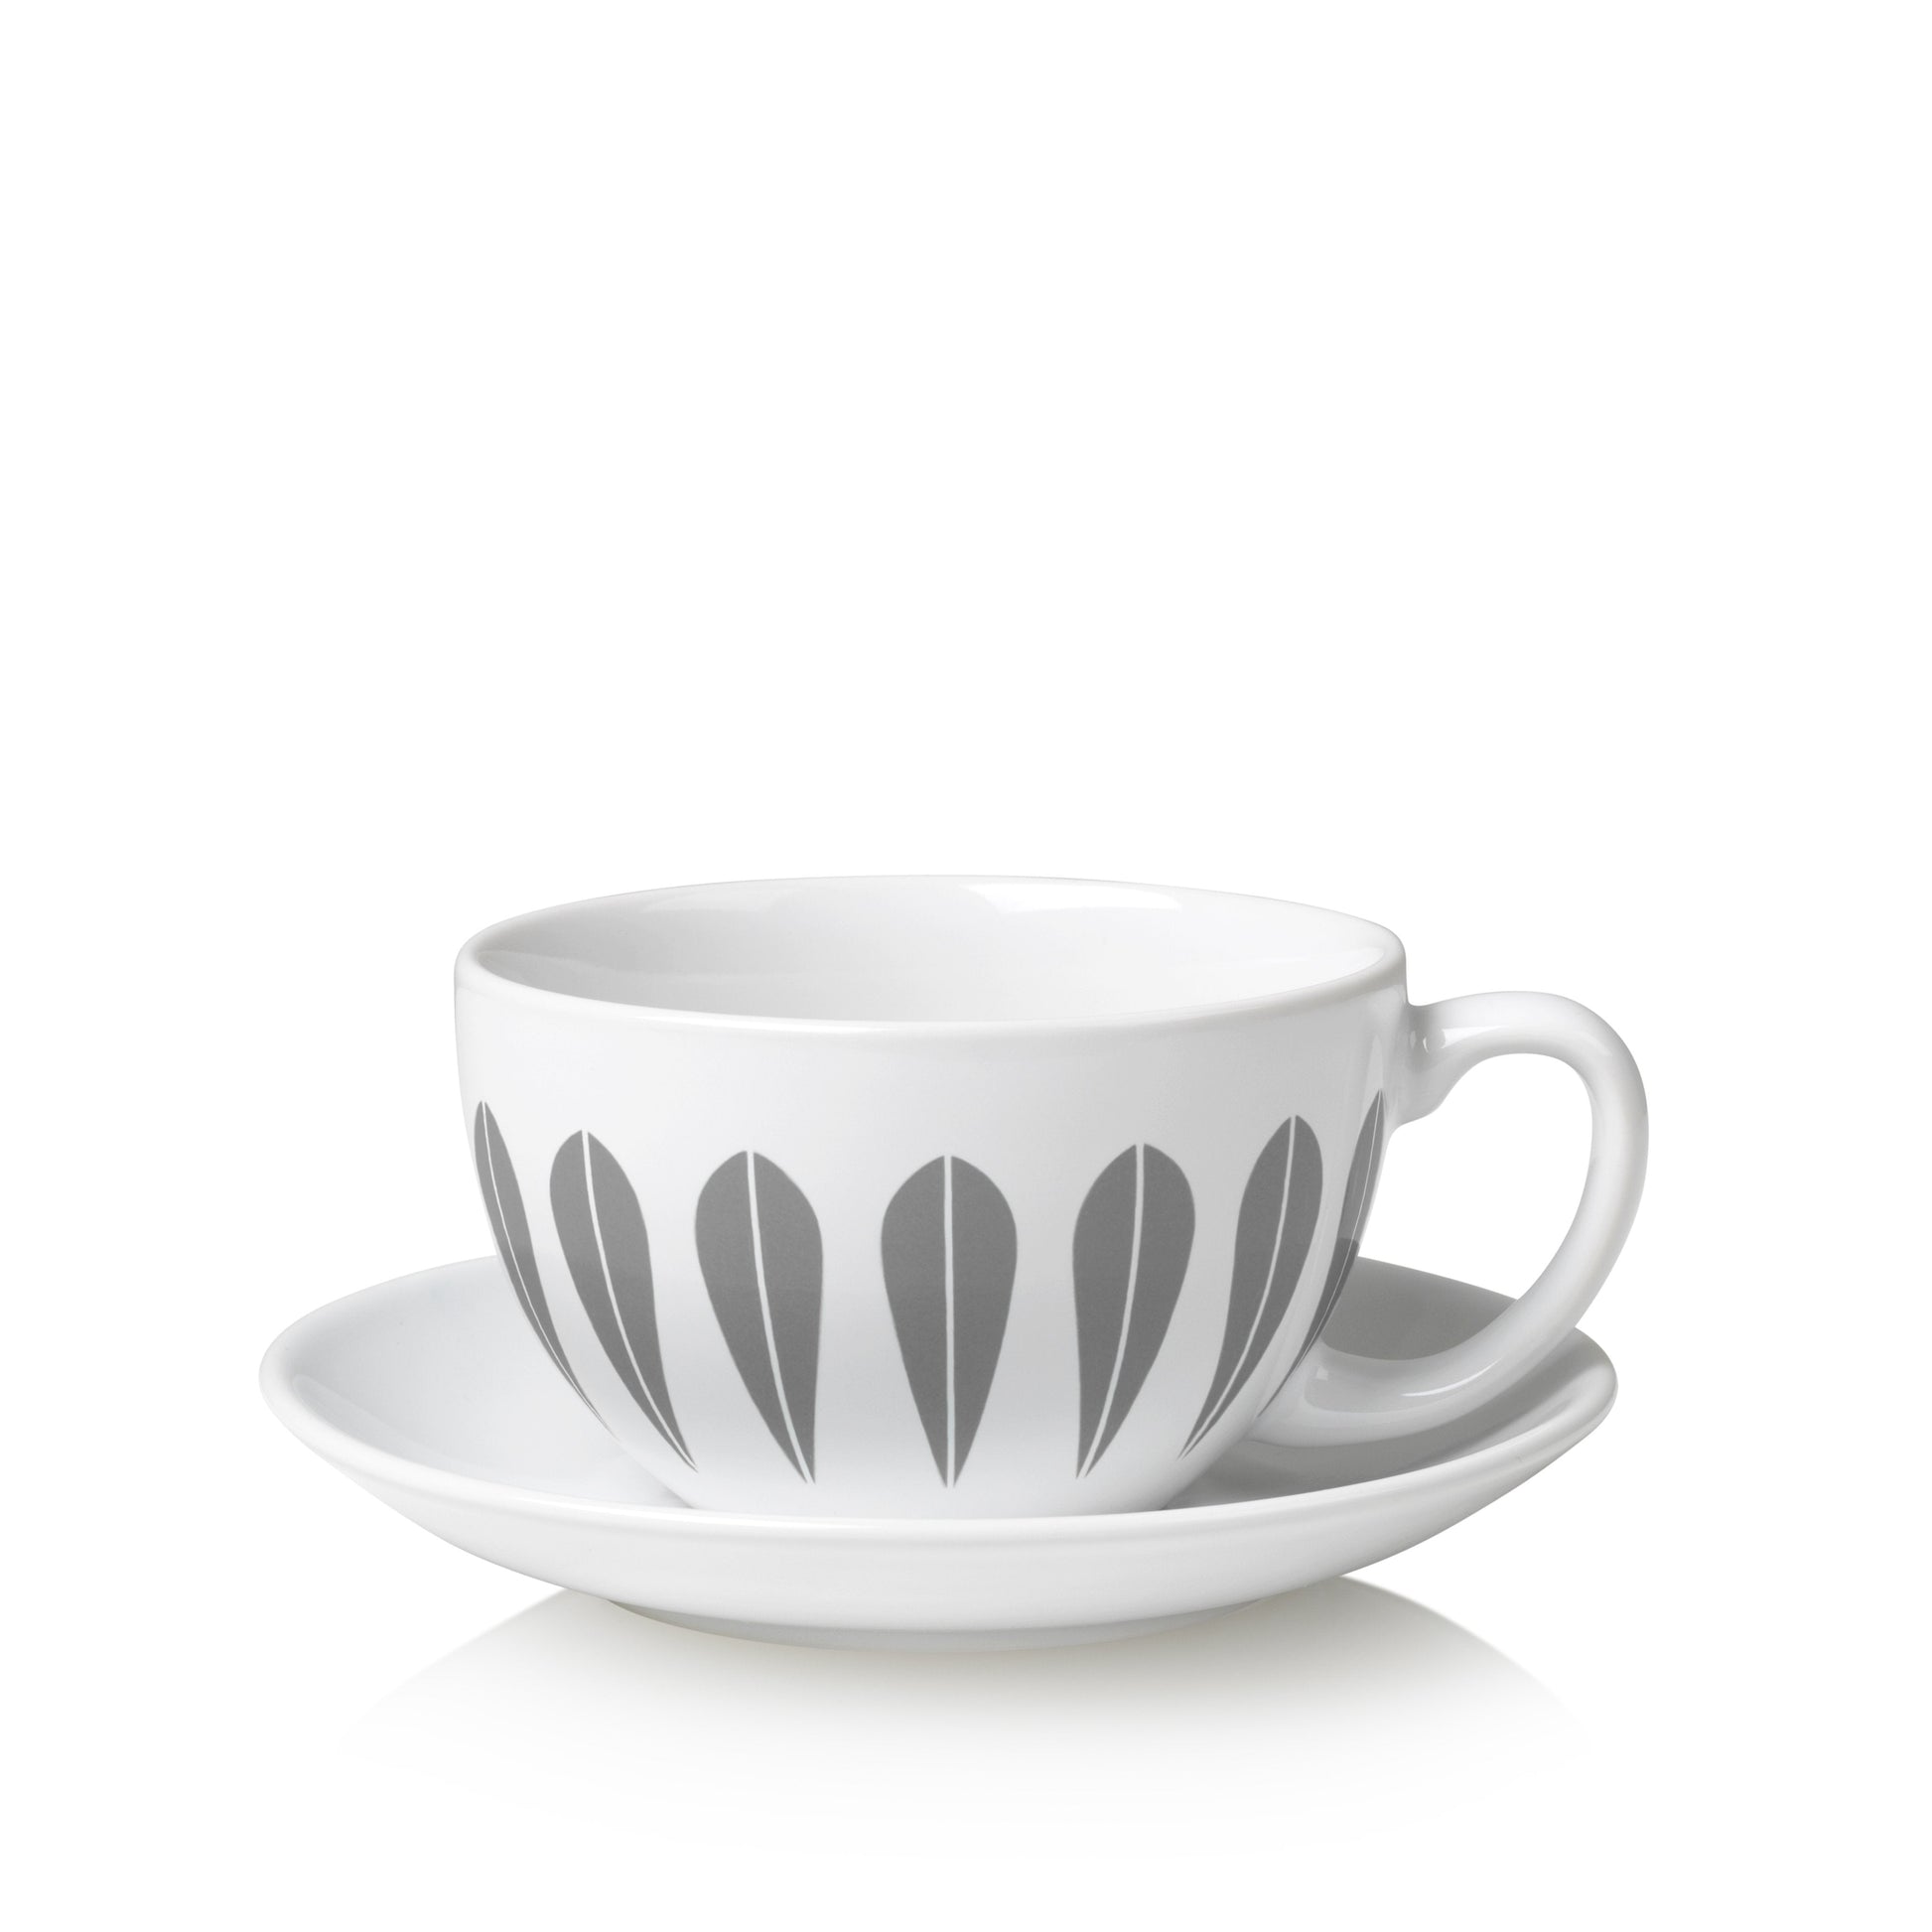 Lucie Kaas, ARNE CLAUSEN COLLECTION, Lotus Tea Cup And Saucer | White, Grey, Coffee & Tea Cups